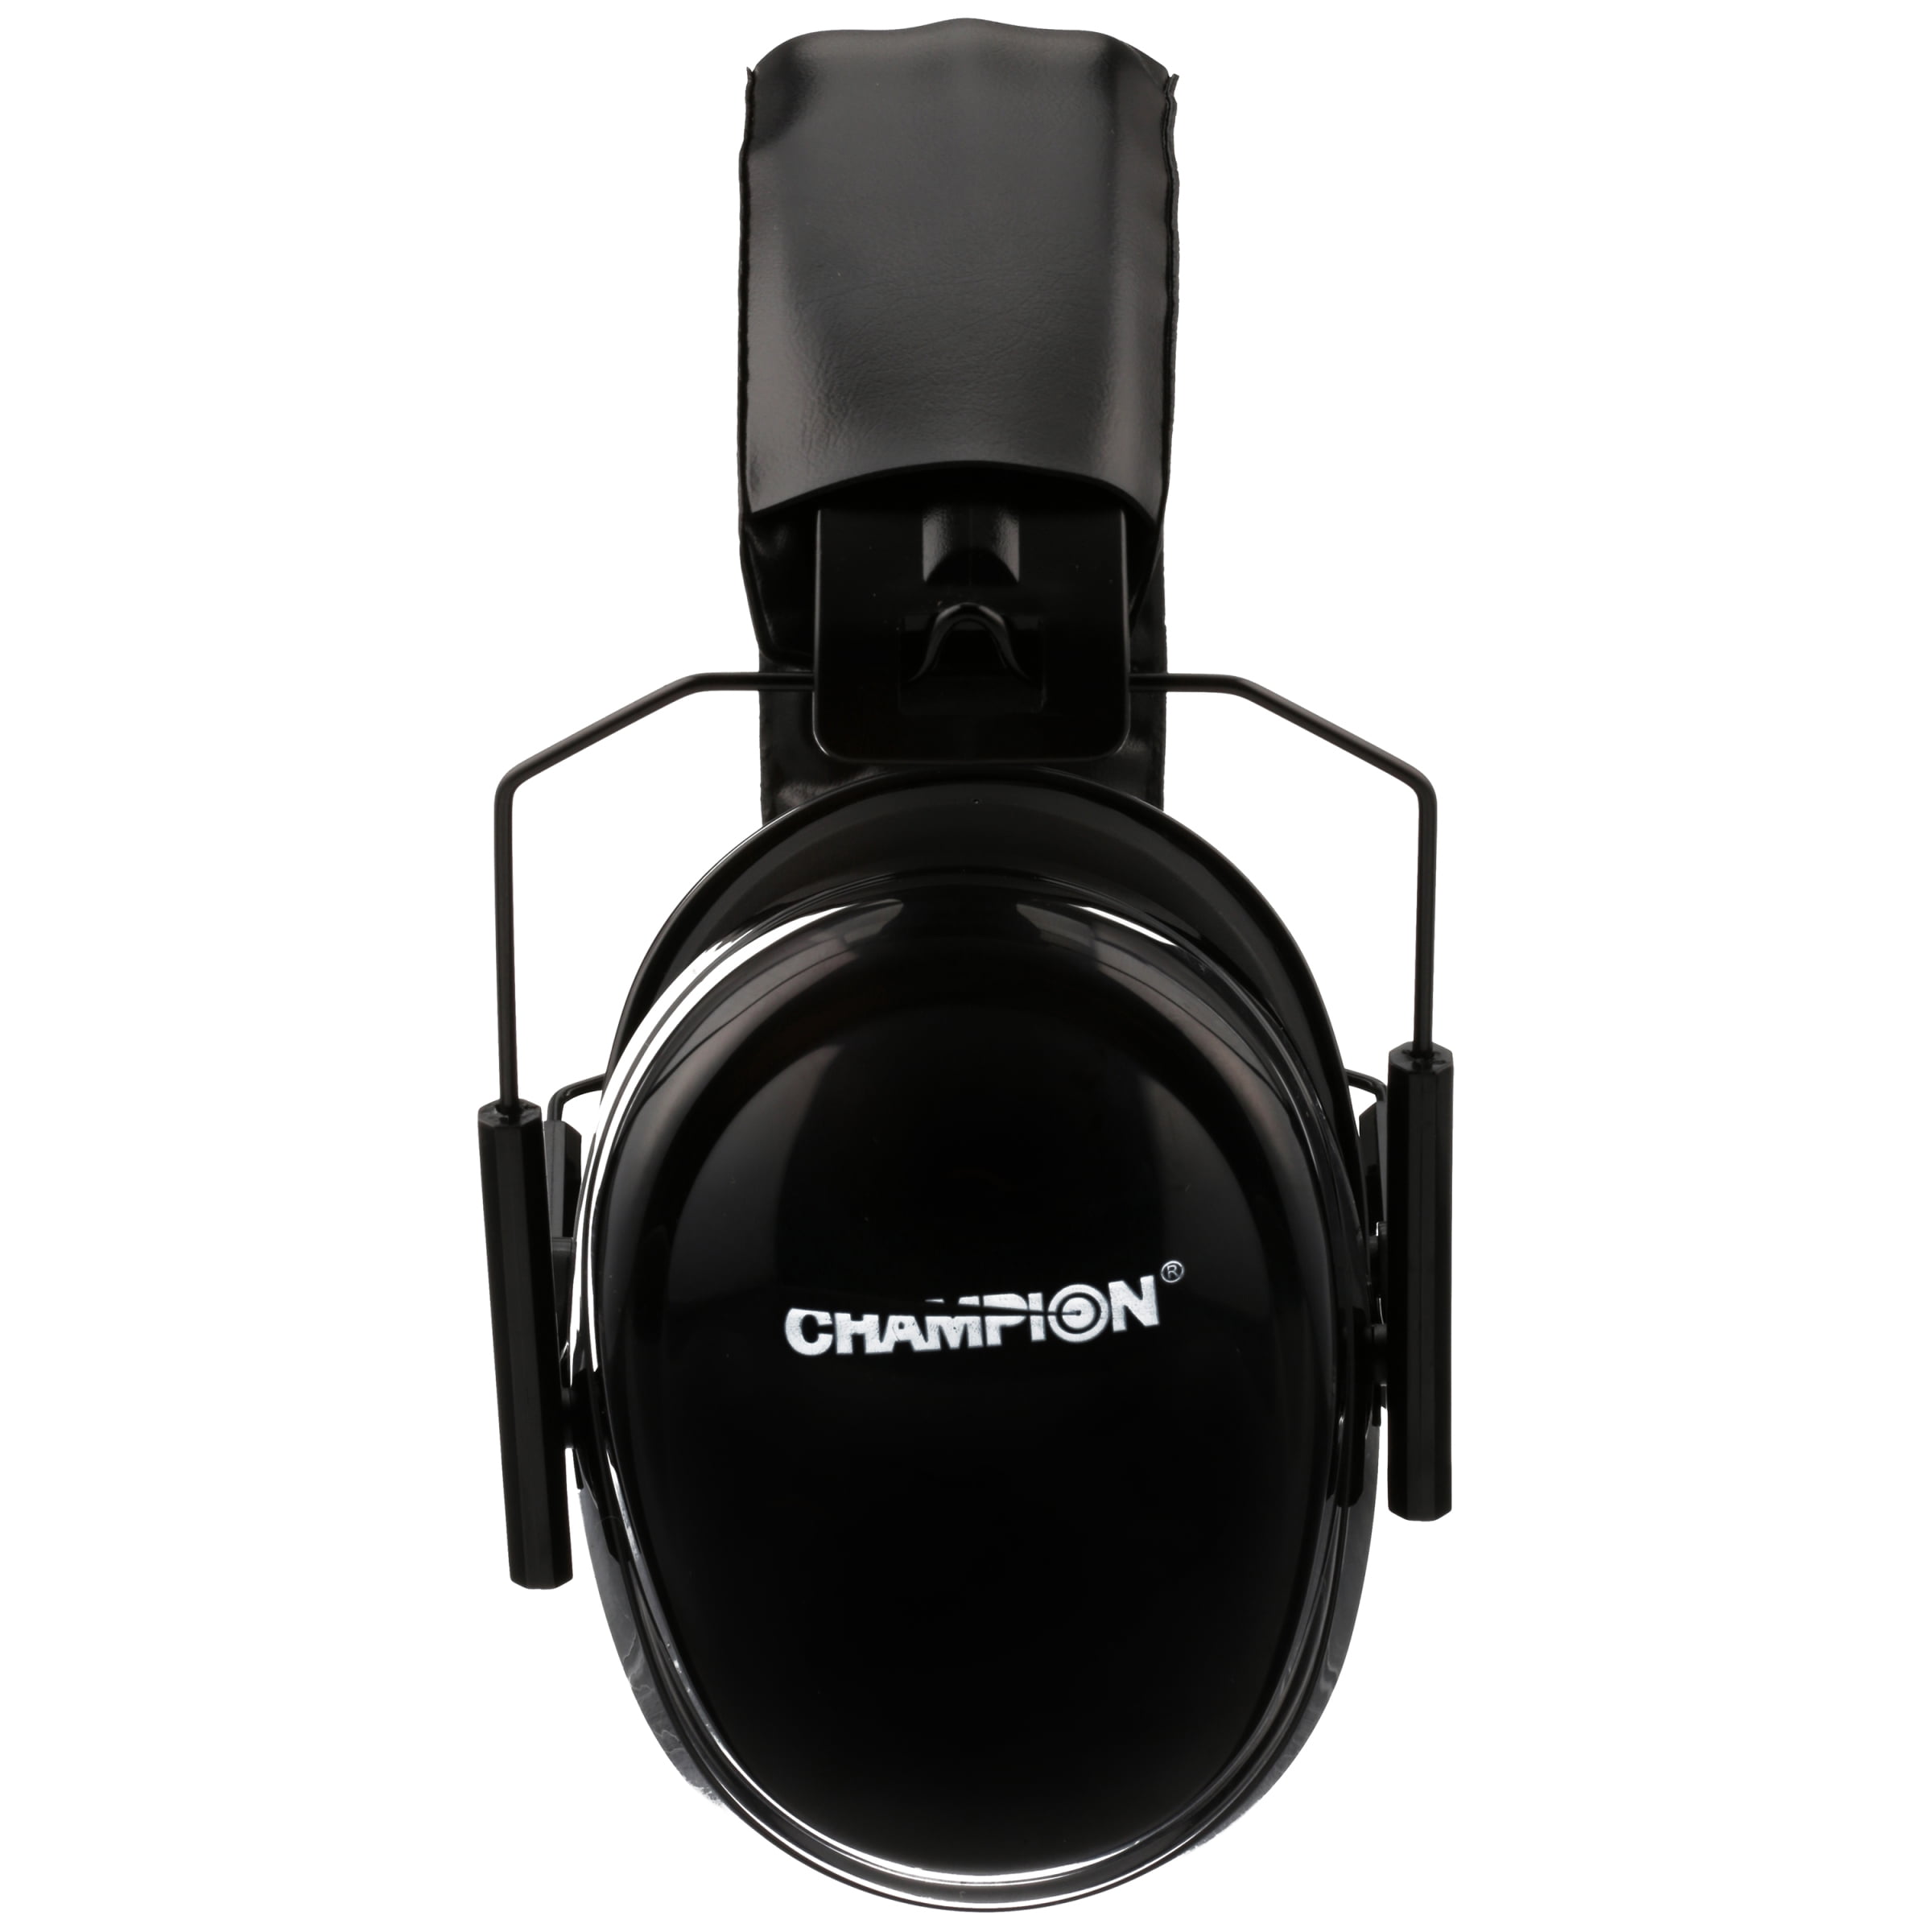 Champion Range and Target Ear Muffs-Passive Ear Protection Black 42820